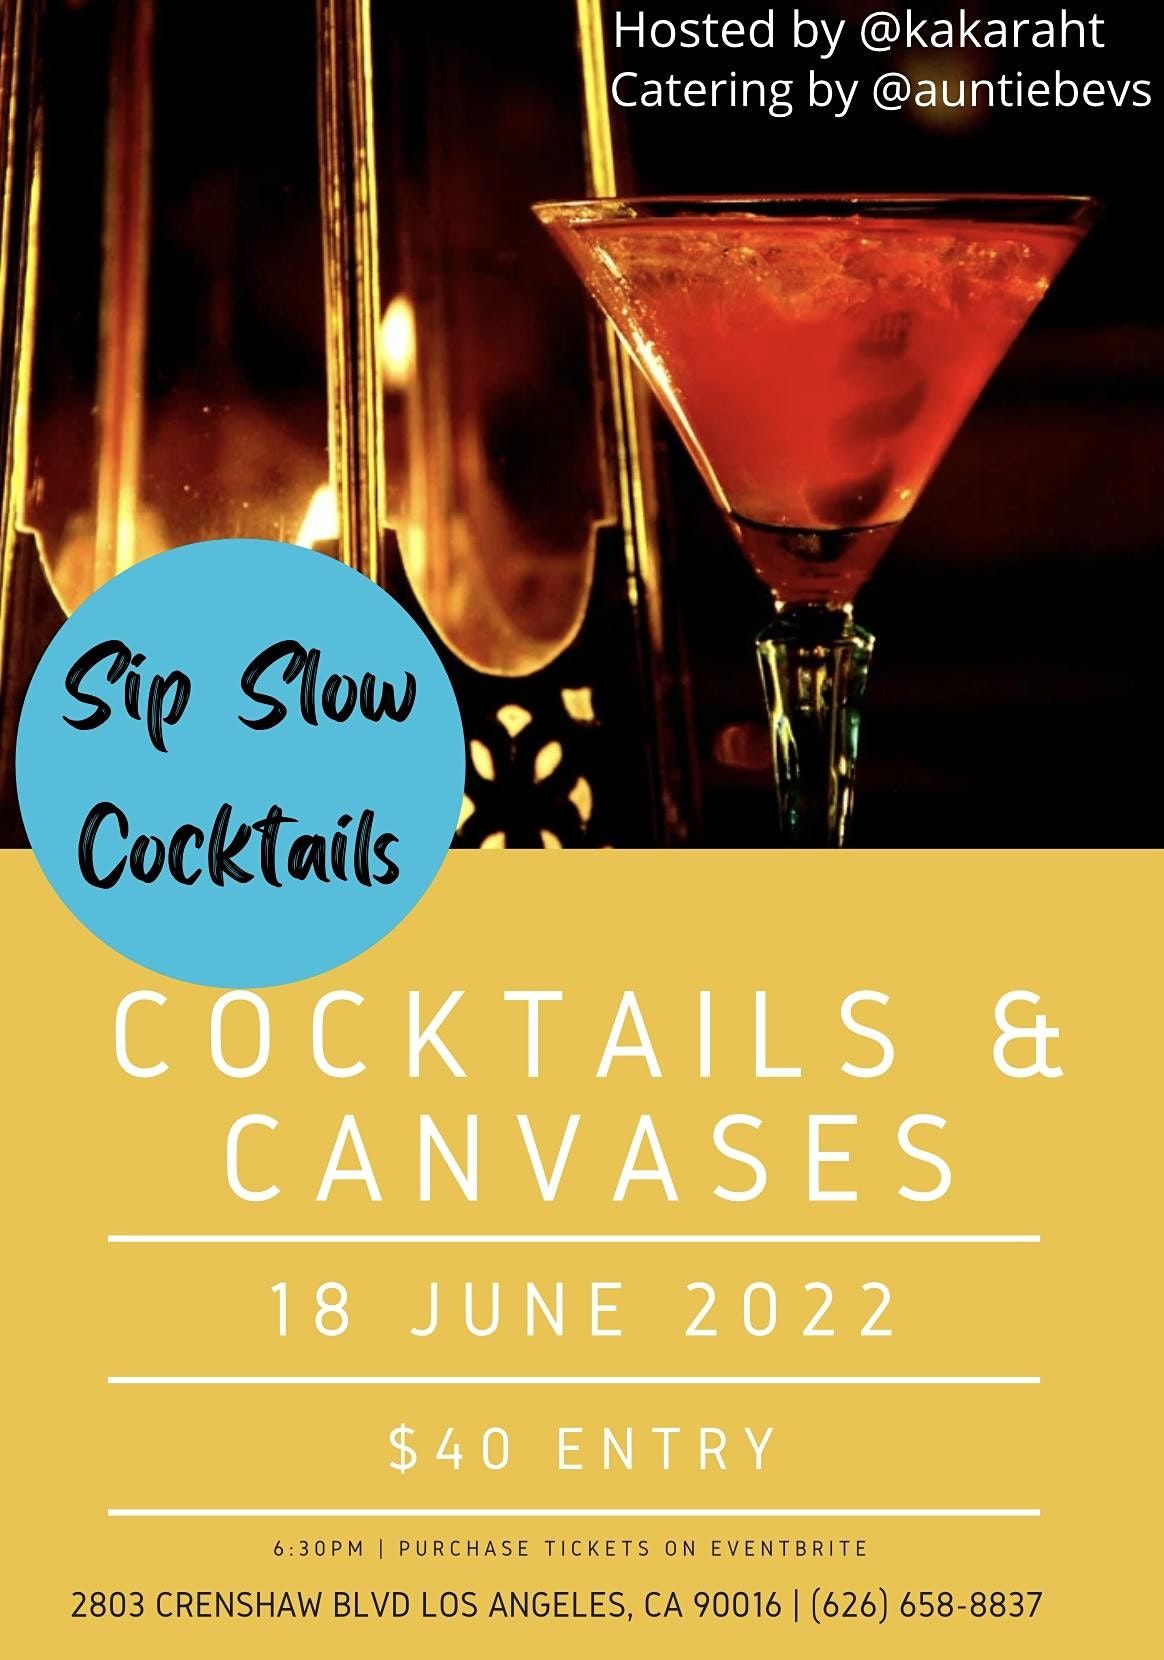 Sip Slow Cocktails & Canvases